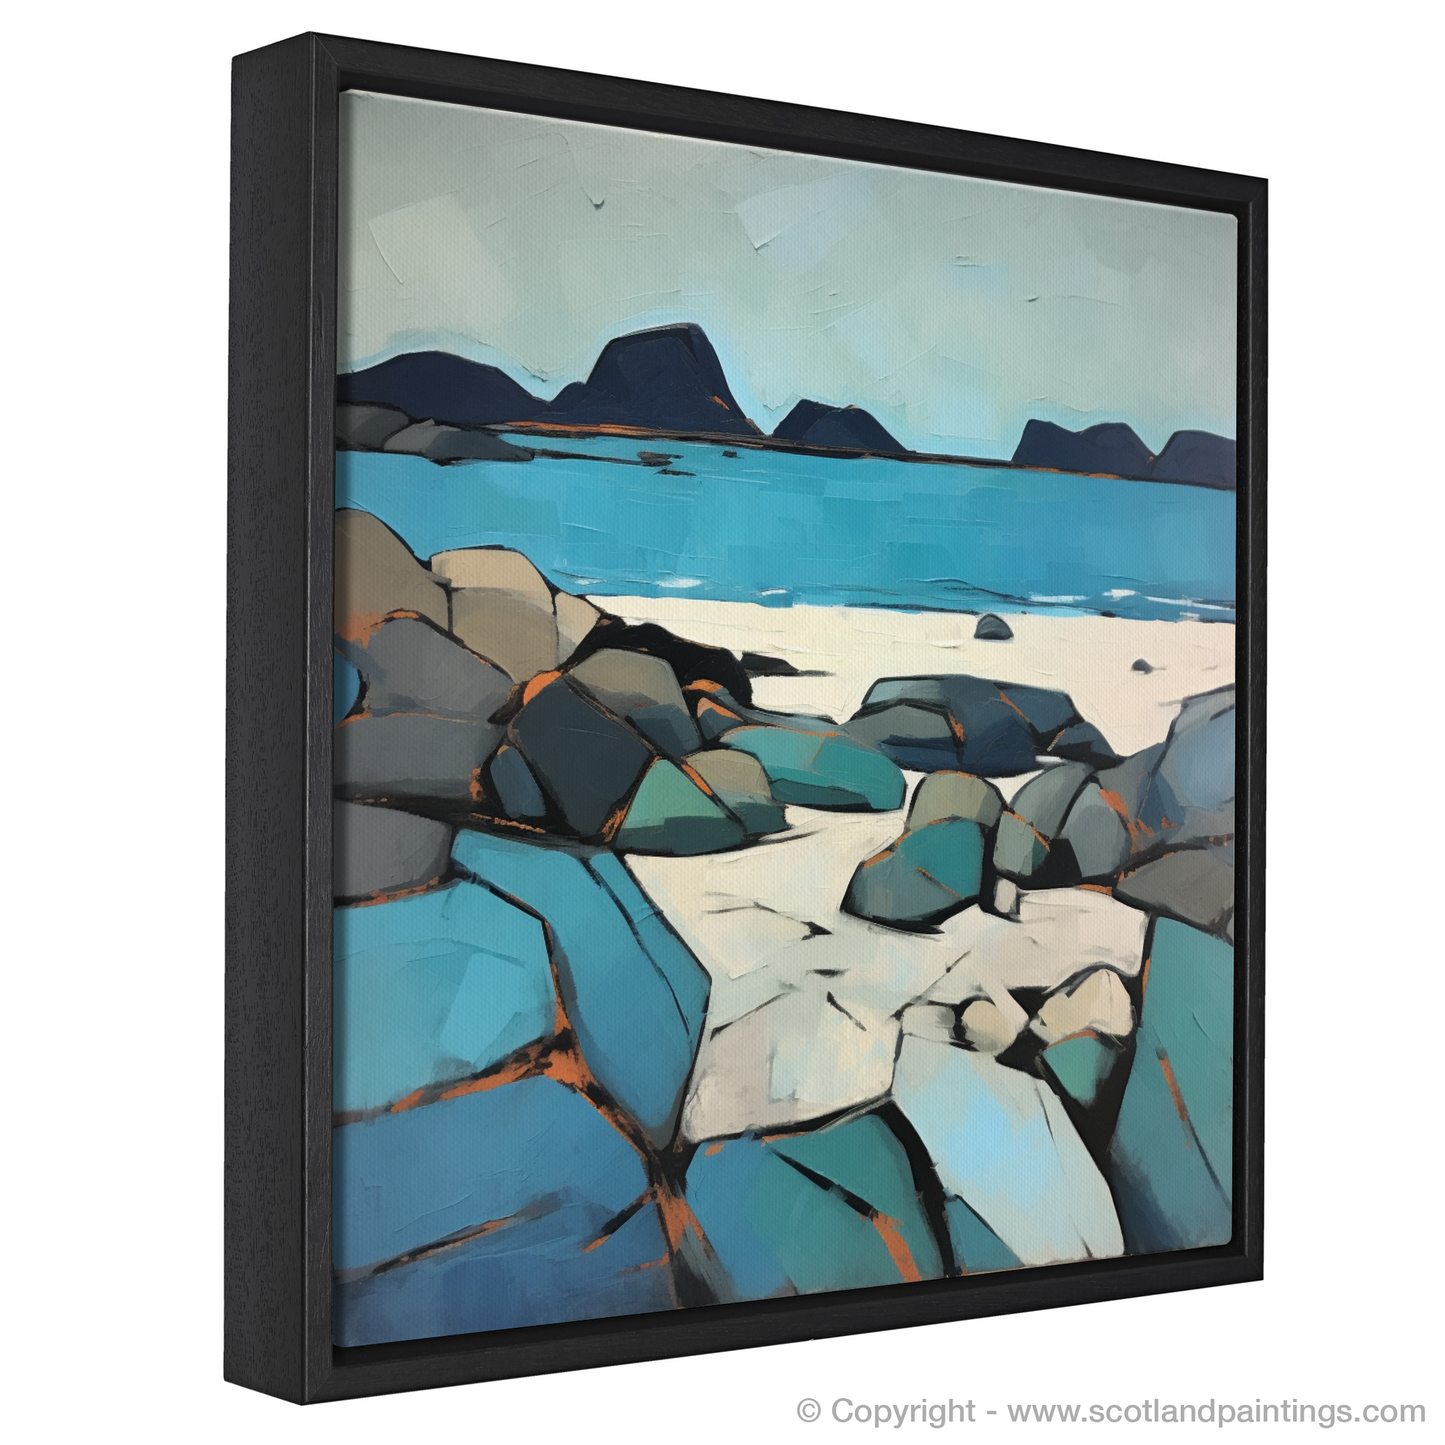 Painting and Art Print of Mellon Udrigle Beach, Wester Ross entitled "Abstract Impressions of Mellon Udrigle Beach".